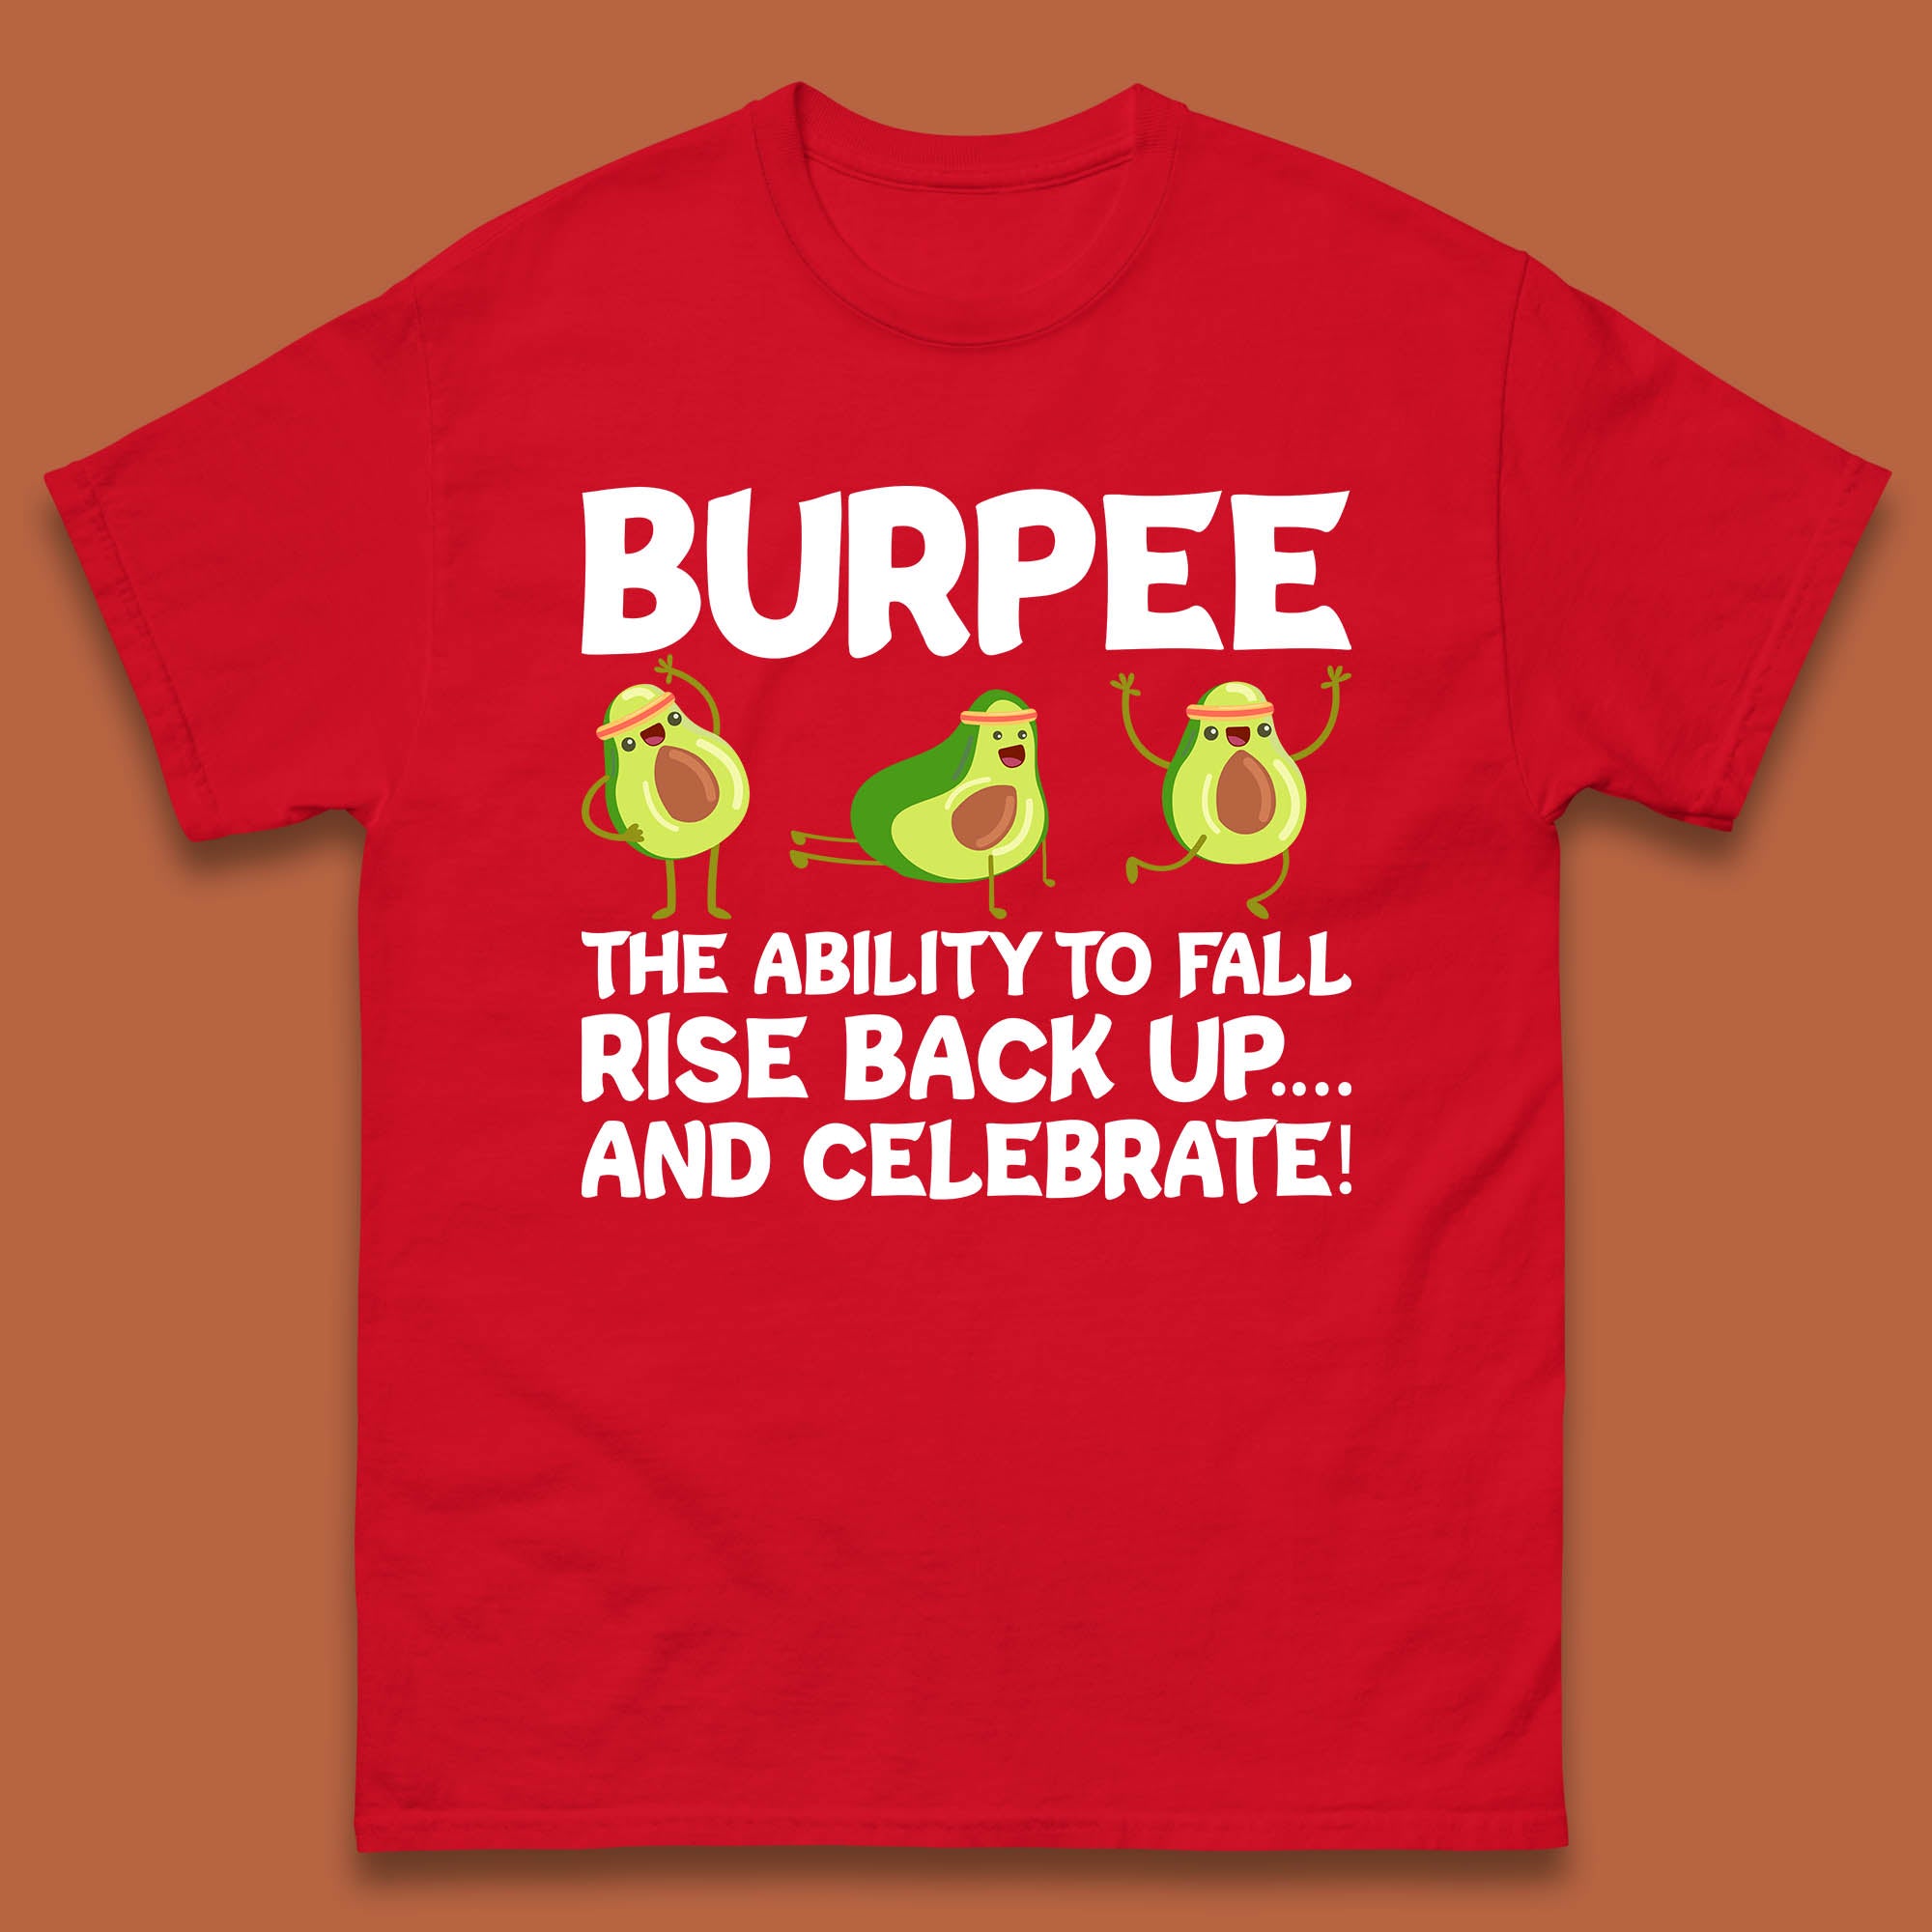 Burpee Avocado Fitness Enthusiasts Burpee The Ability To Fall Rise Back Up And Celebrate Mens Tee Top